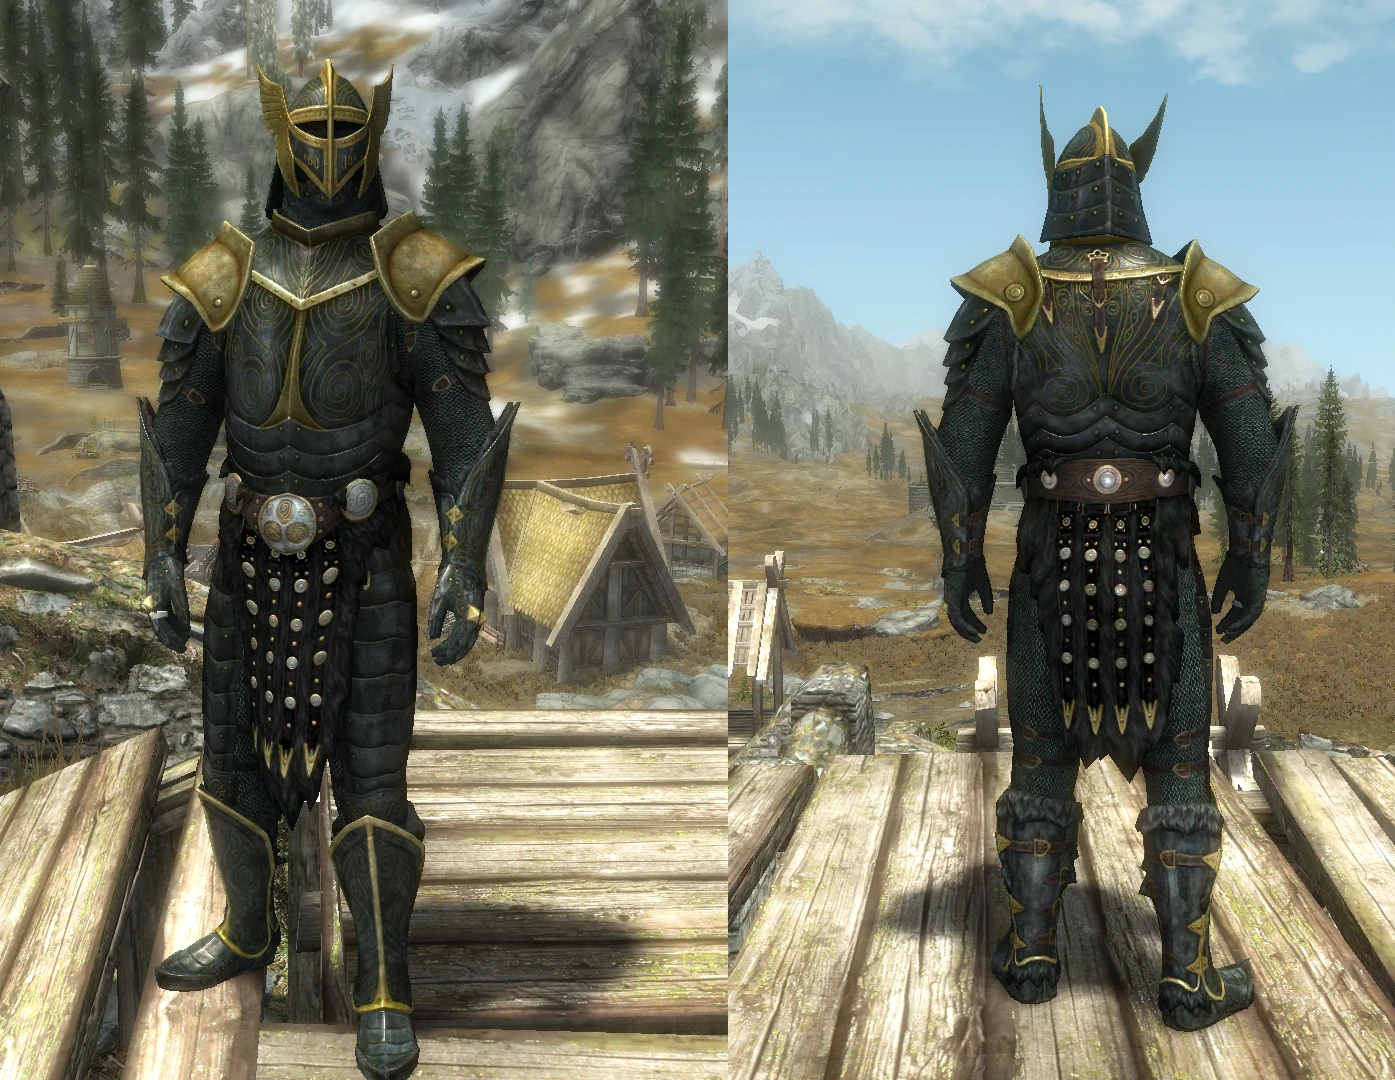 Blued Steel Plate Armor - Special Edition at Skyrim ...